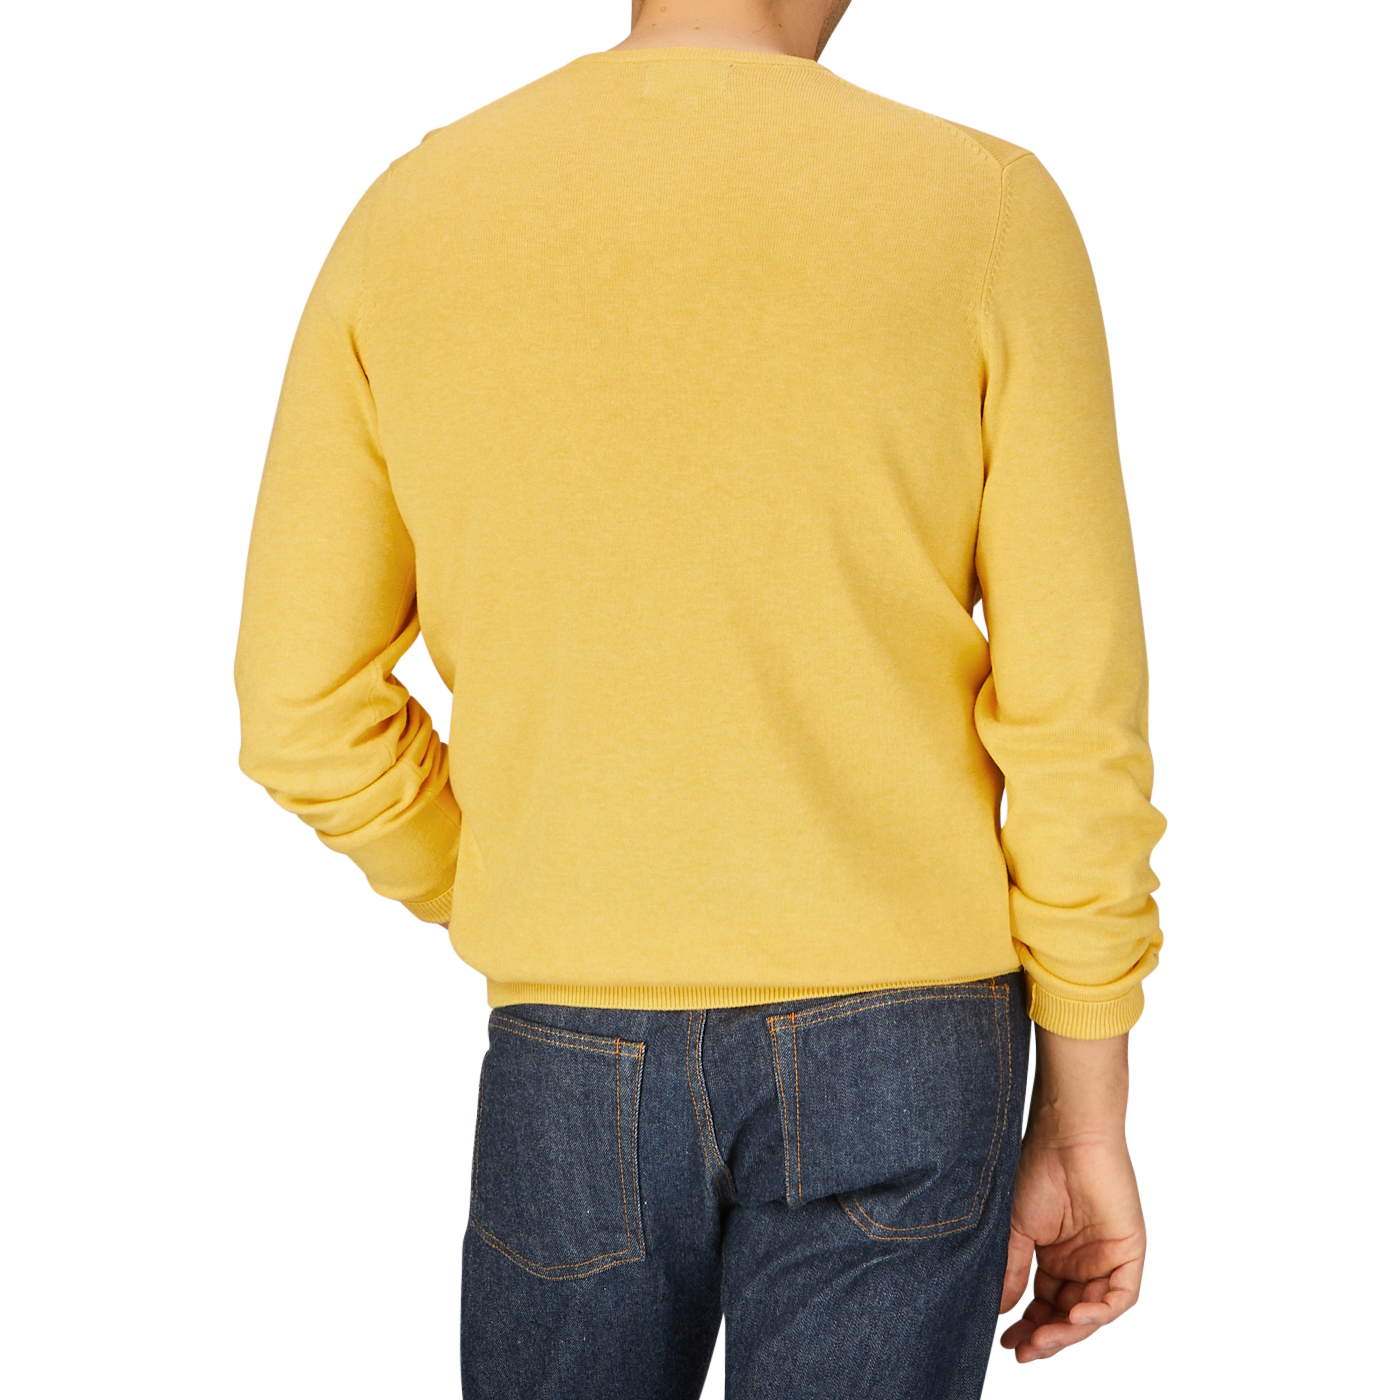 Rear view of a person wearing an Alan Paine Corn Yellow Luxury Cotton Crewneck and blue jeans.